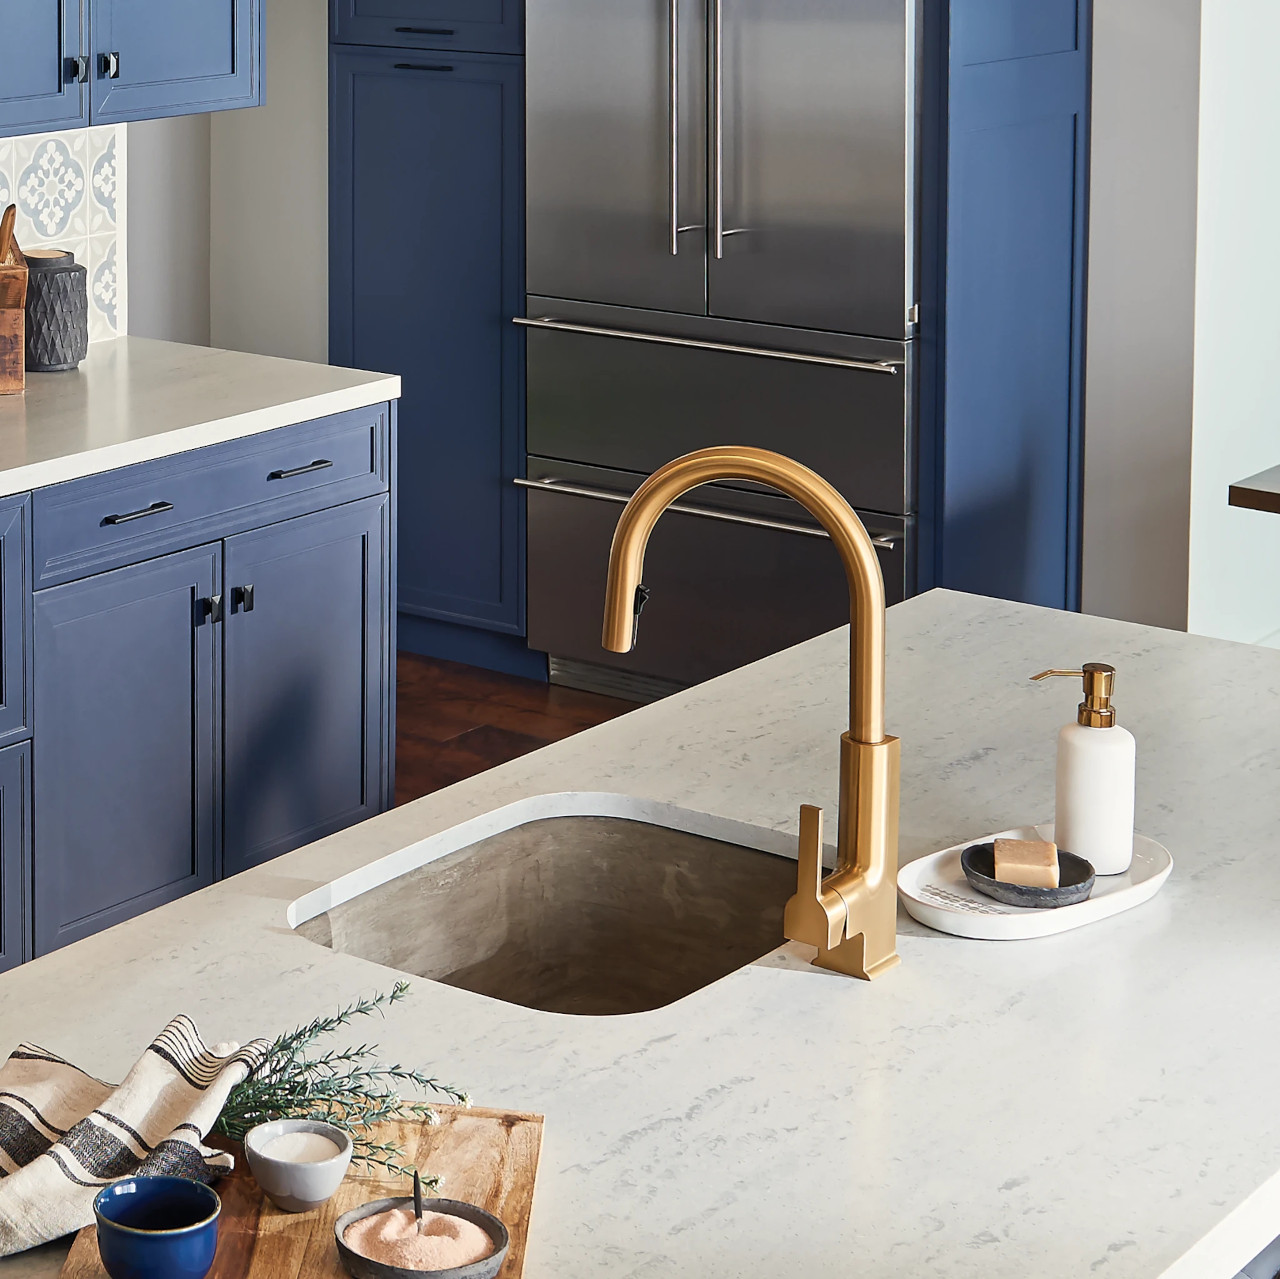 Kitchen Featuring Brushed Gold Faucet by Moen -- This faucet is available for sale at Amazon (affiliate link). Photo Courtesy of Moen.com.